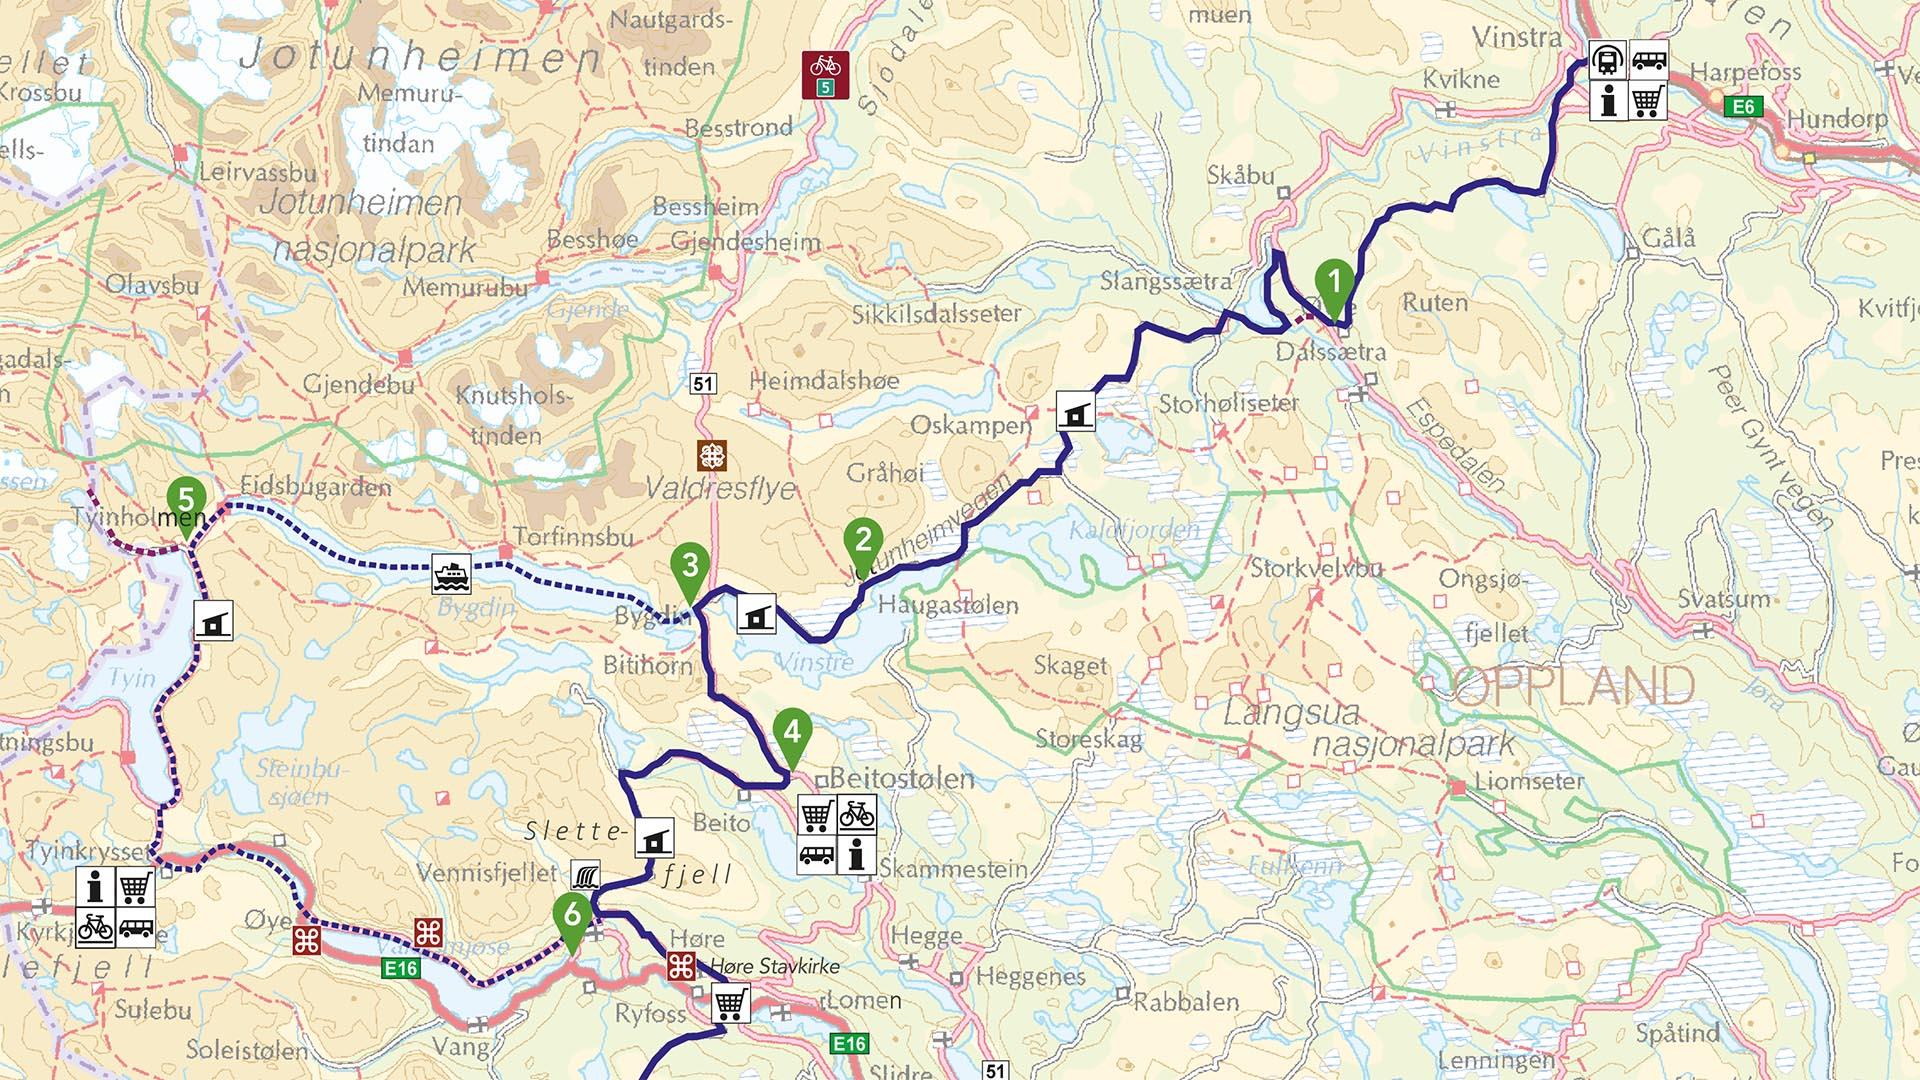 Image of a map that shows the northern part of the cycling route Mjølkevegen.